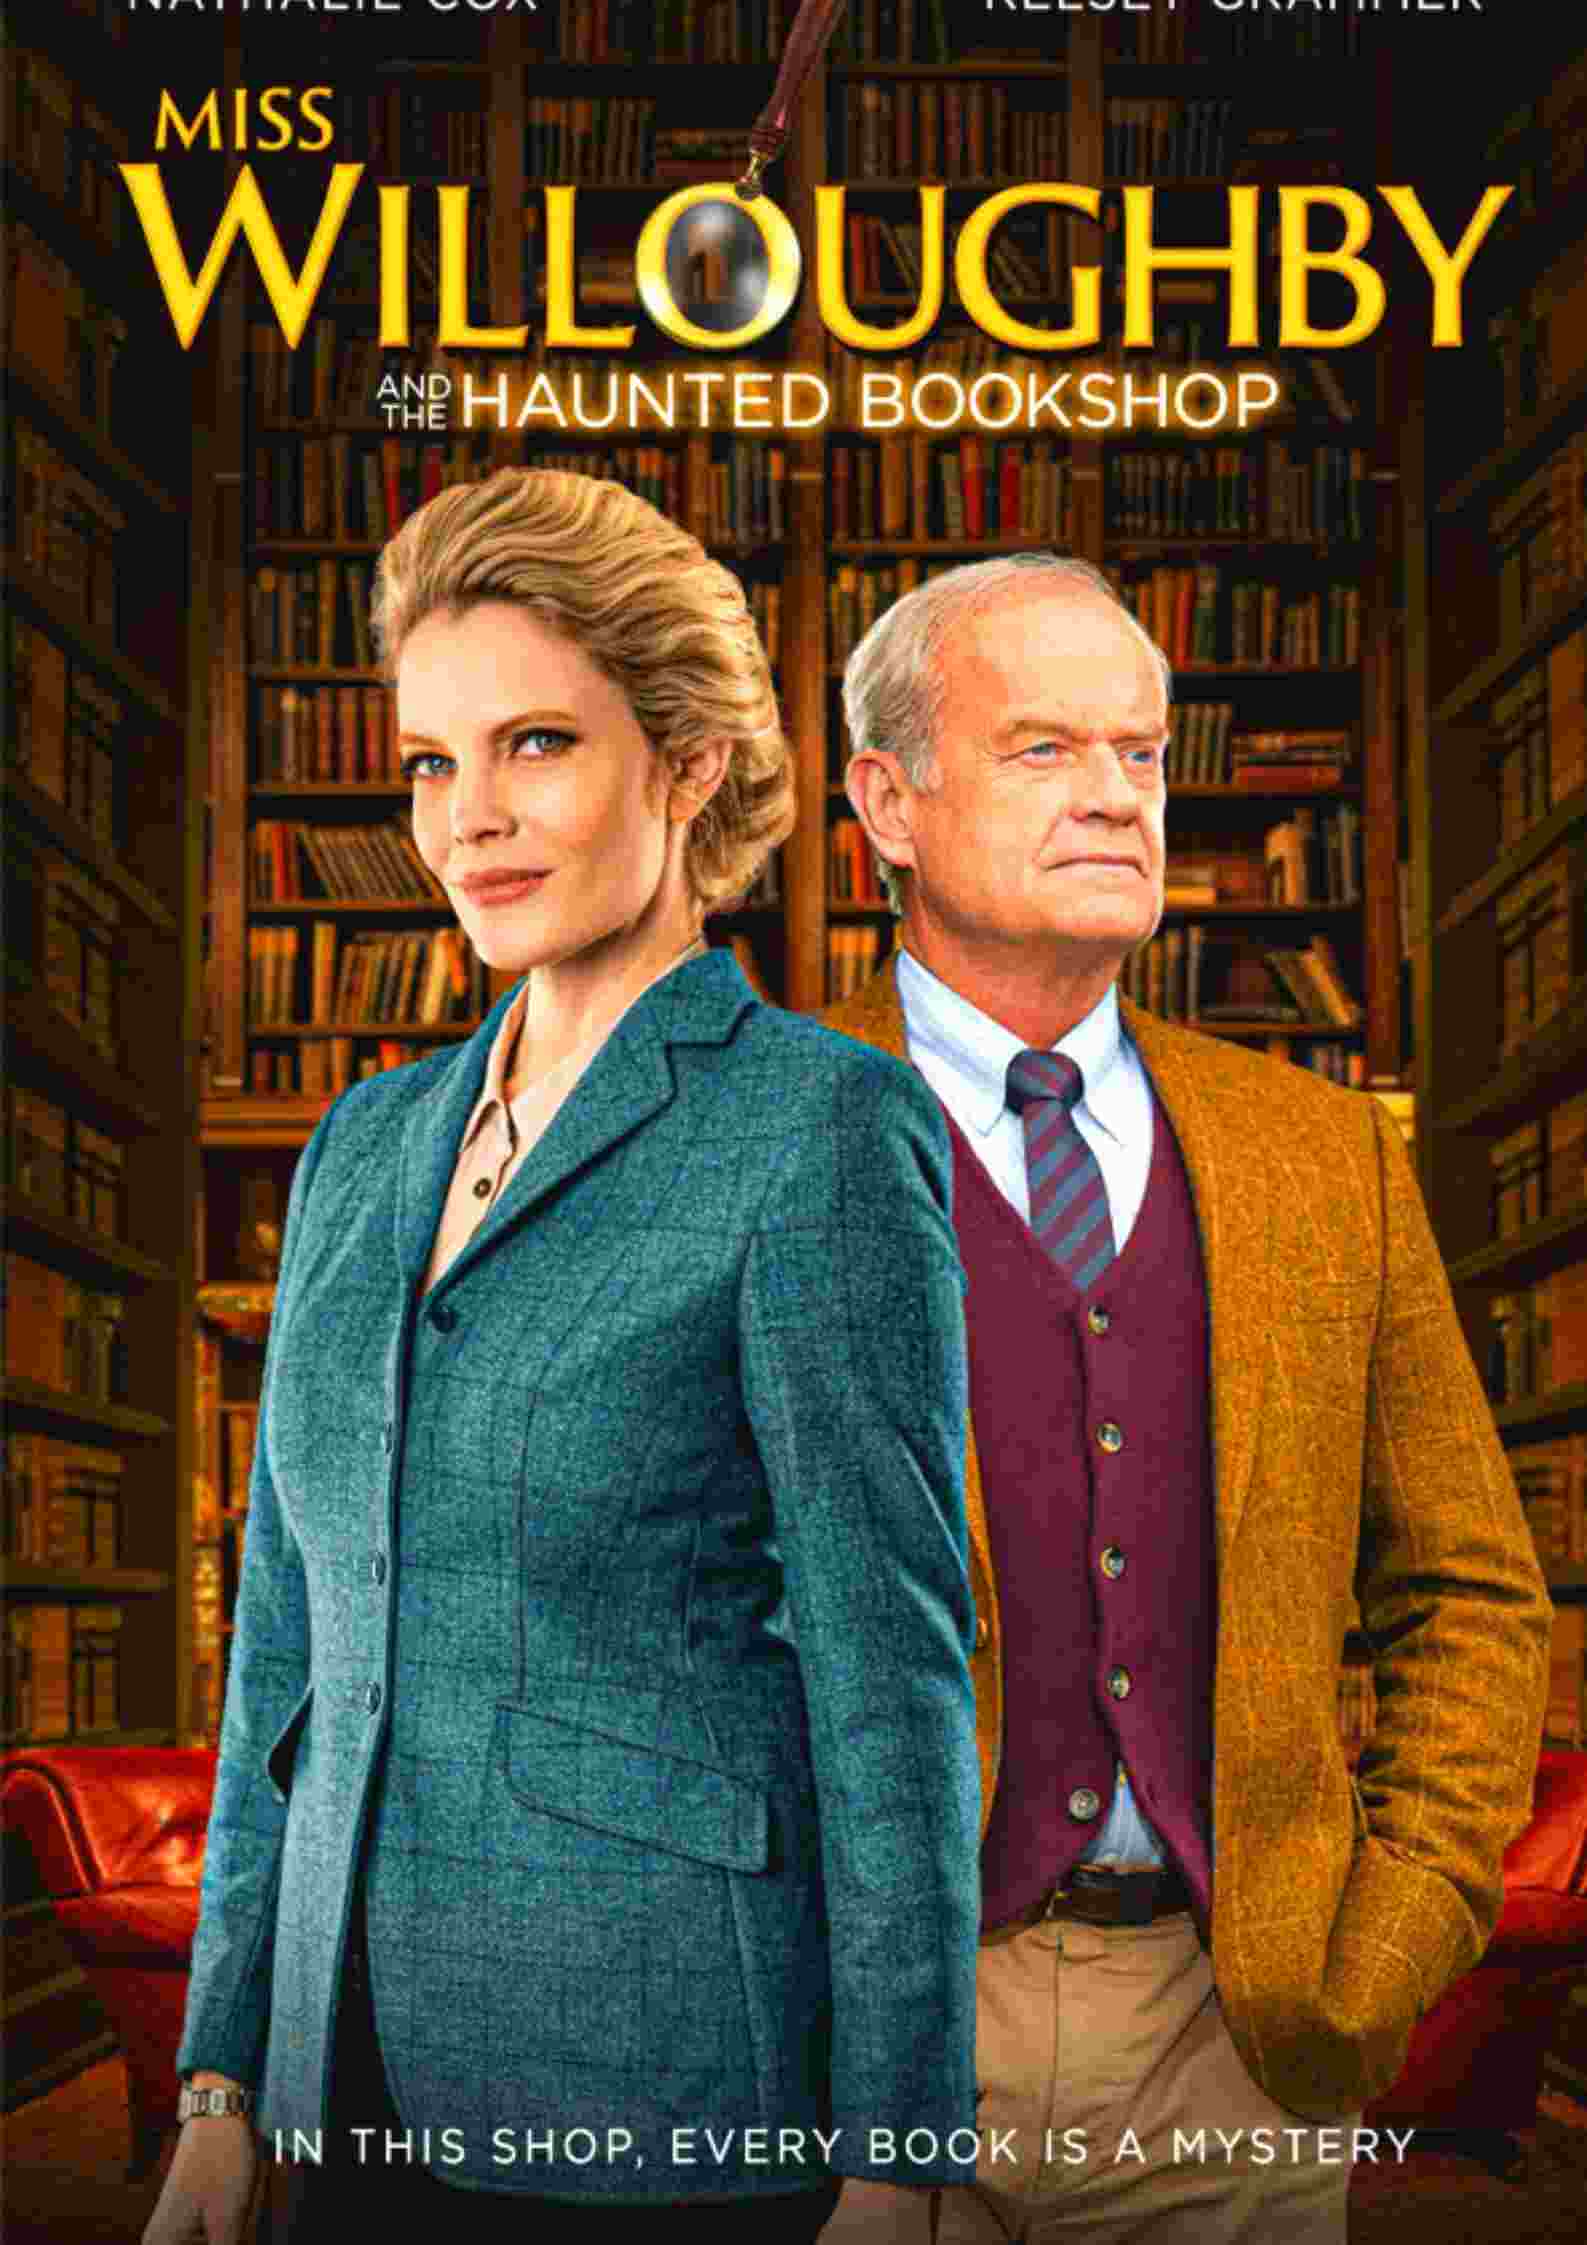 Miss Willoughby and the Haunted Bookshop parents guide and age rating | 2022